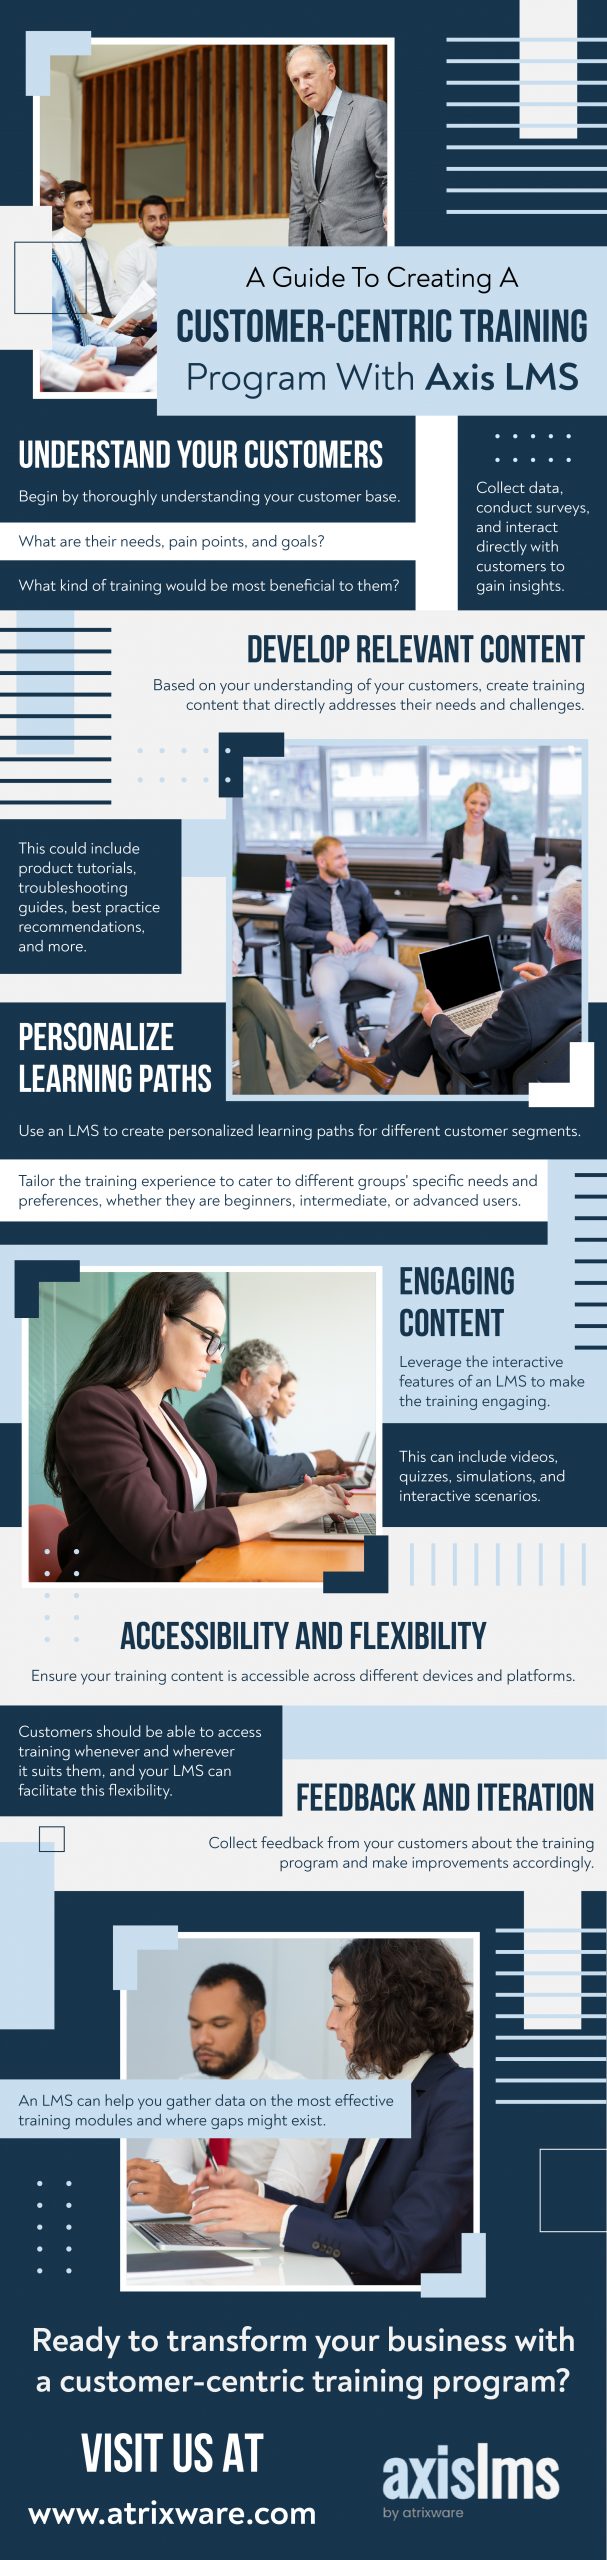 An infographic for A Guide To Creating A Customer-Centric Training Program With Axis LMS